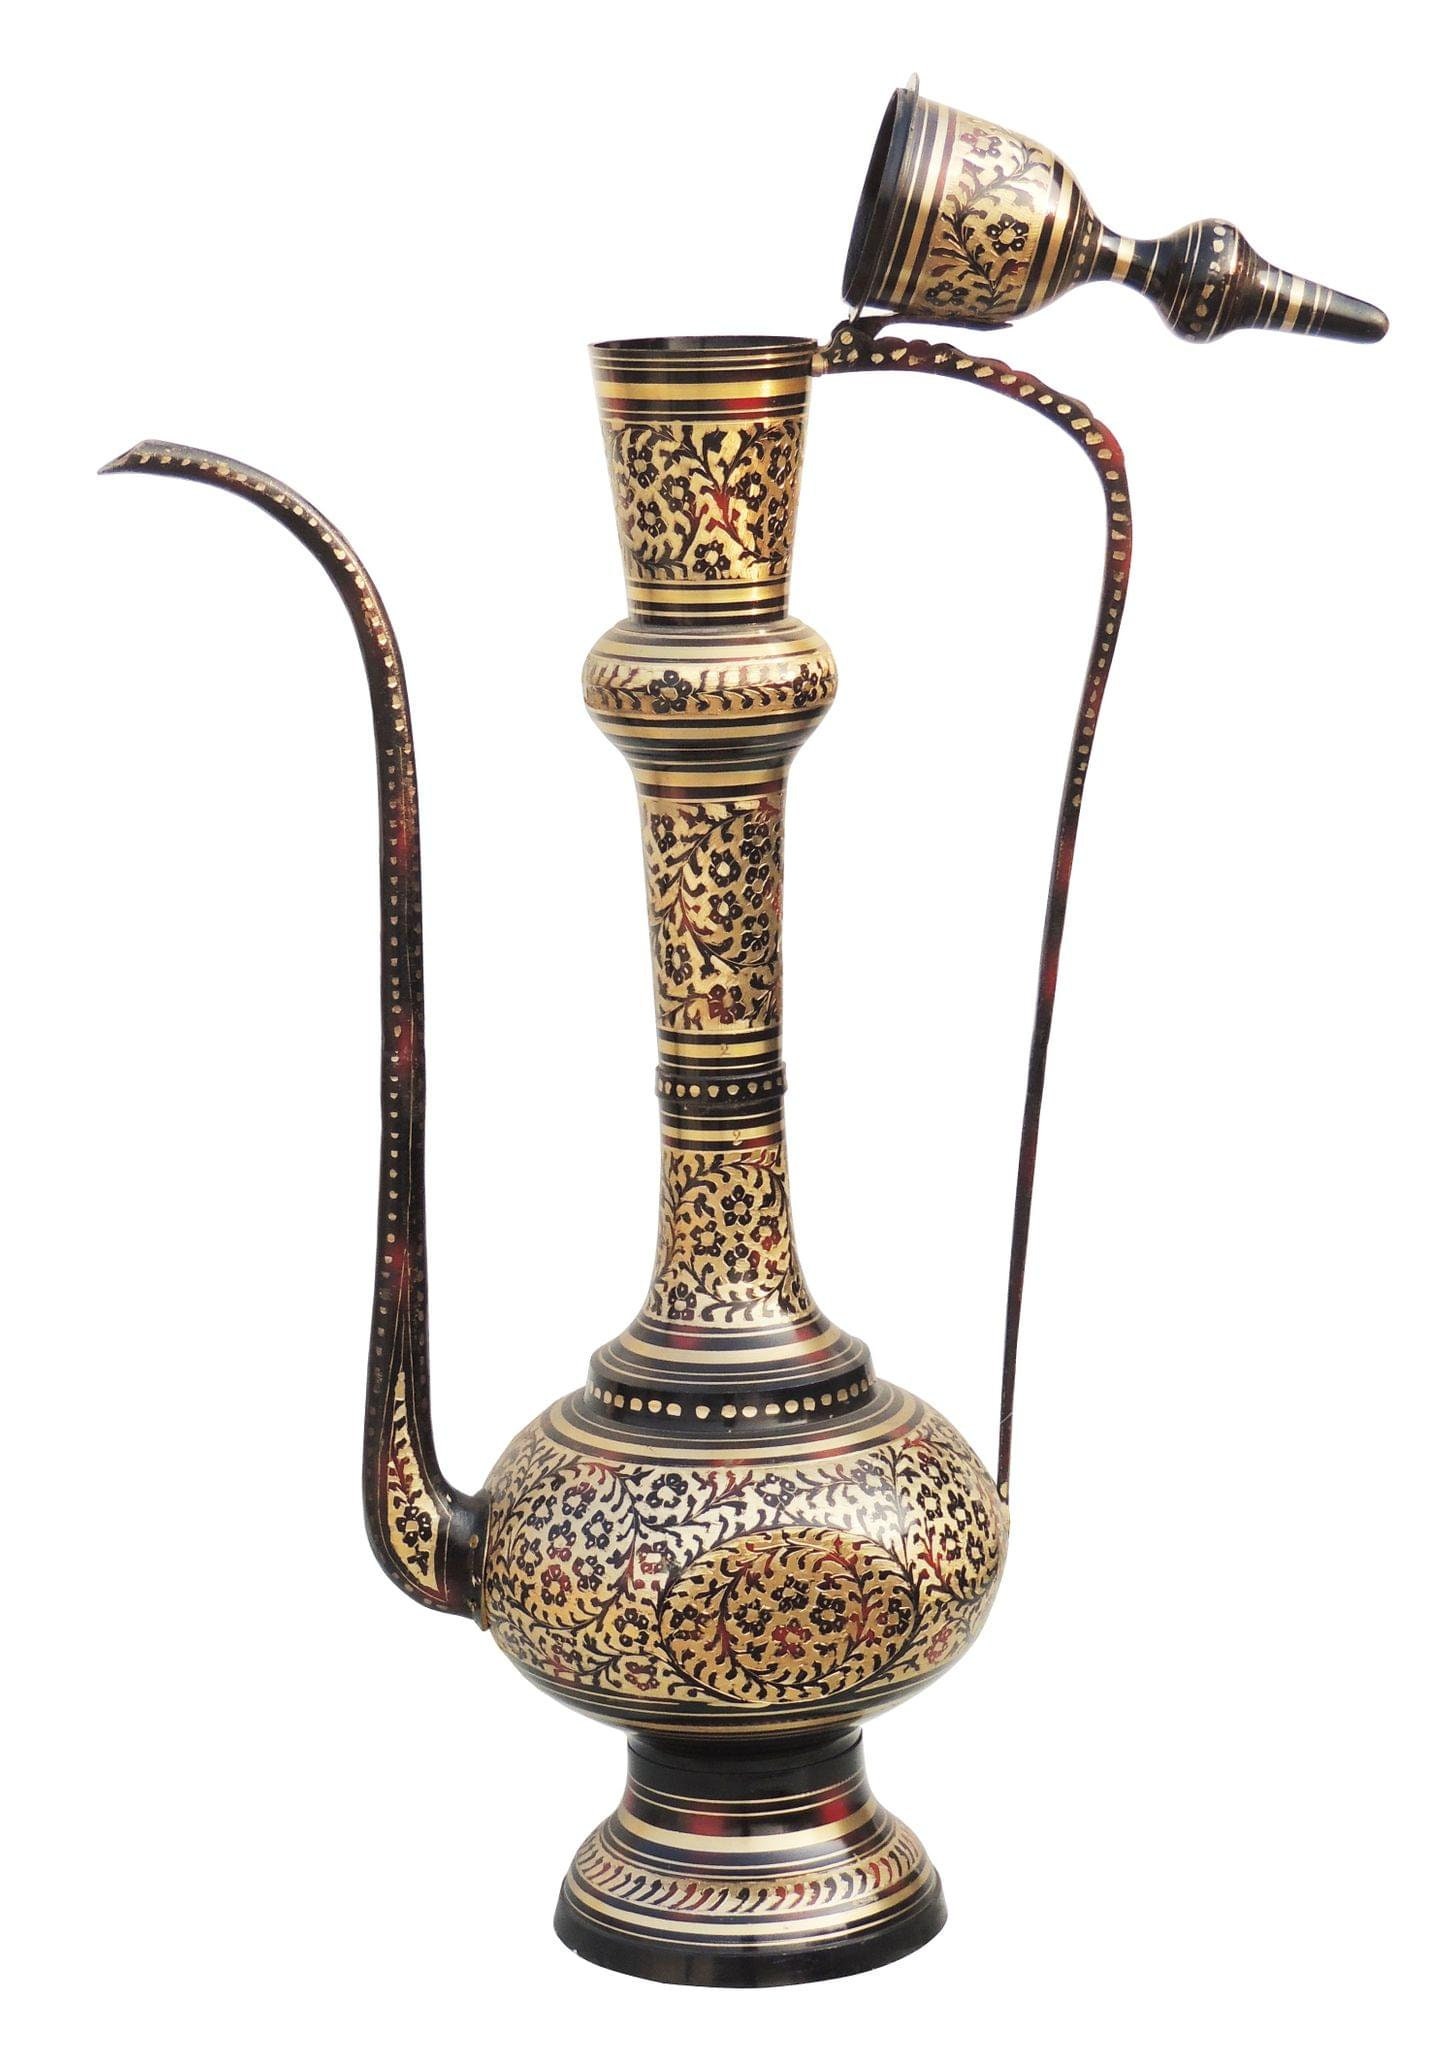 Etched Solid Brass Surahi Aftaba Ewer Dallah /bh – Pathway Market